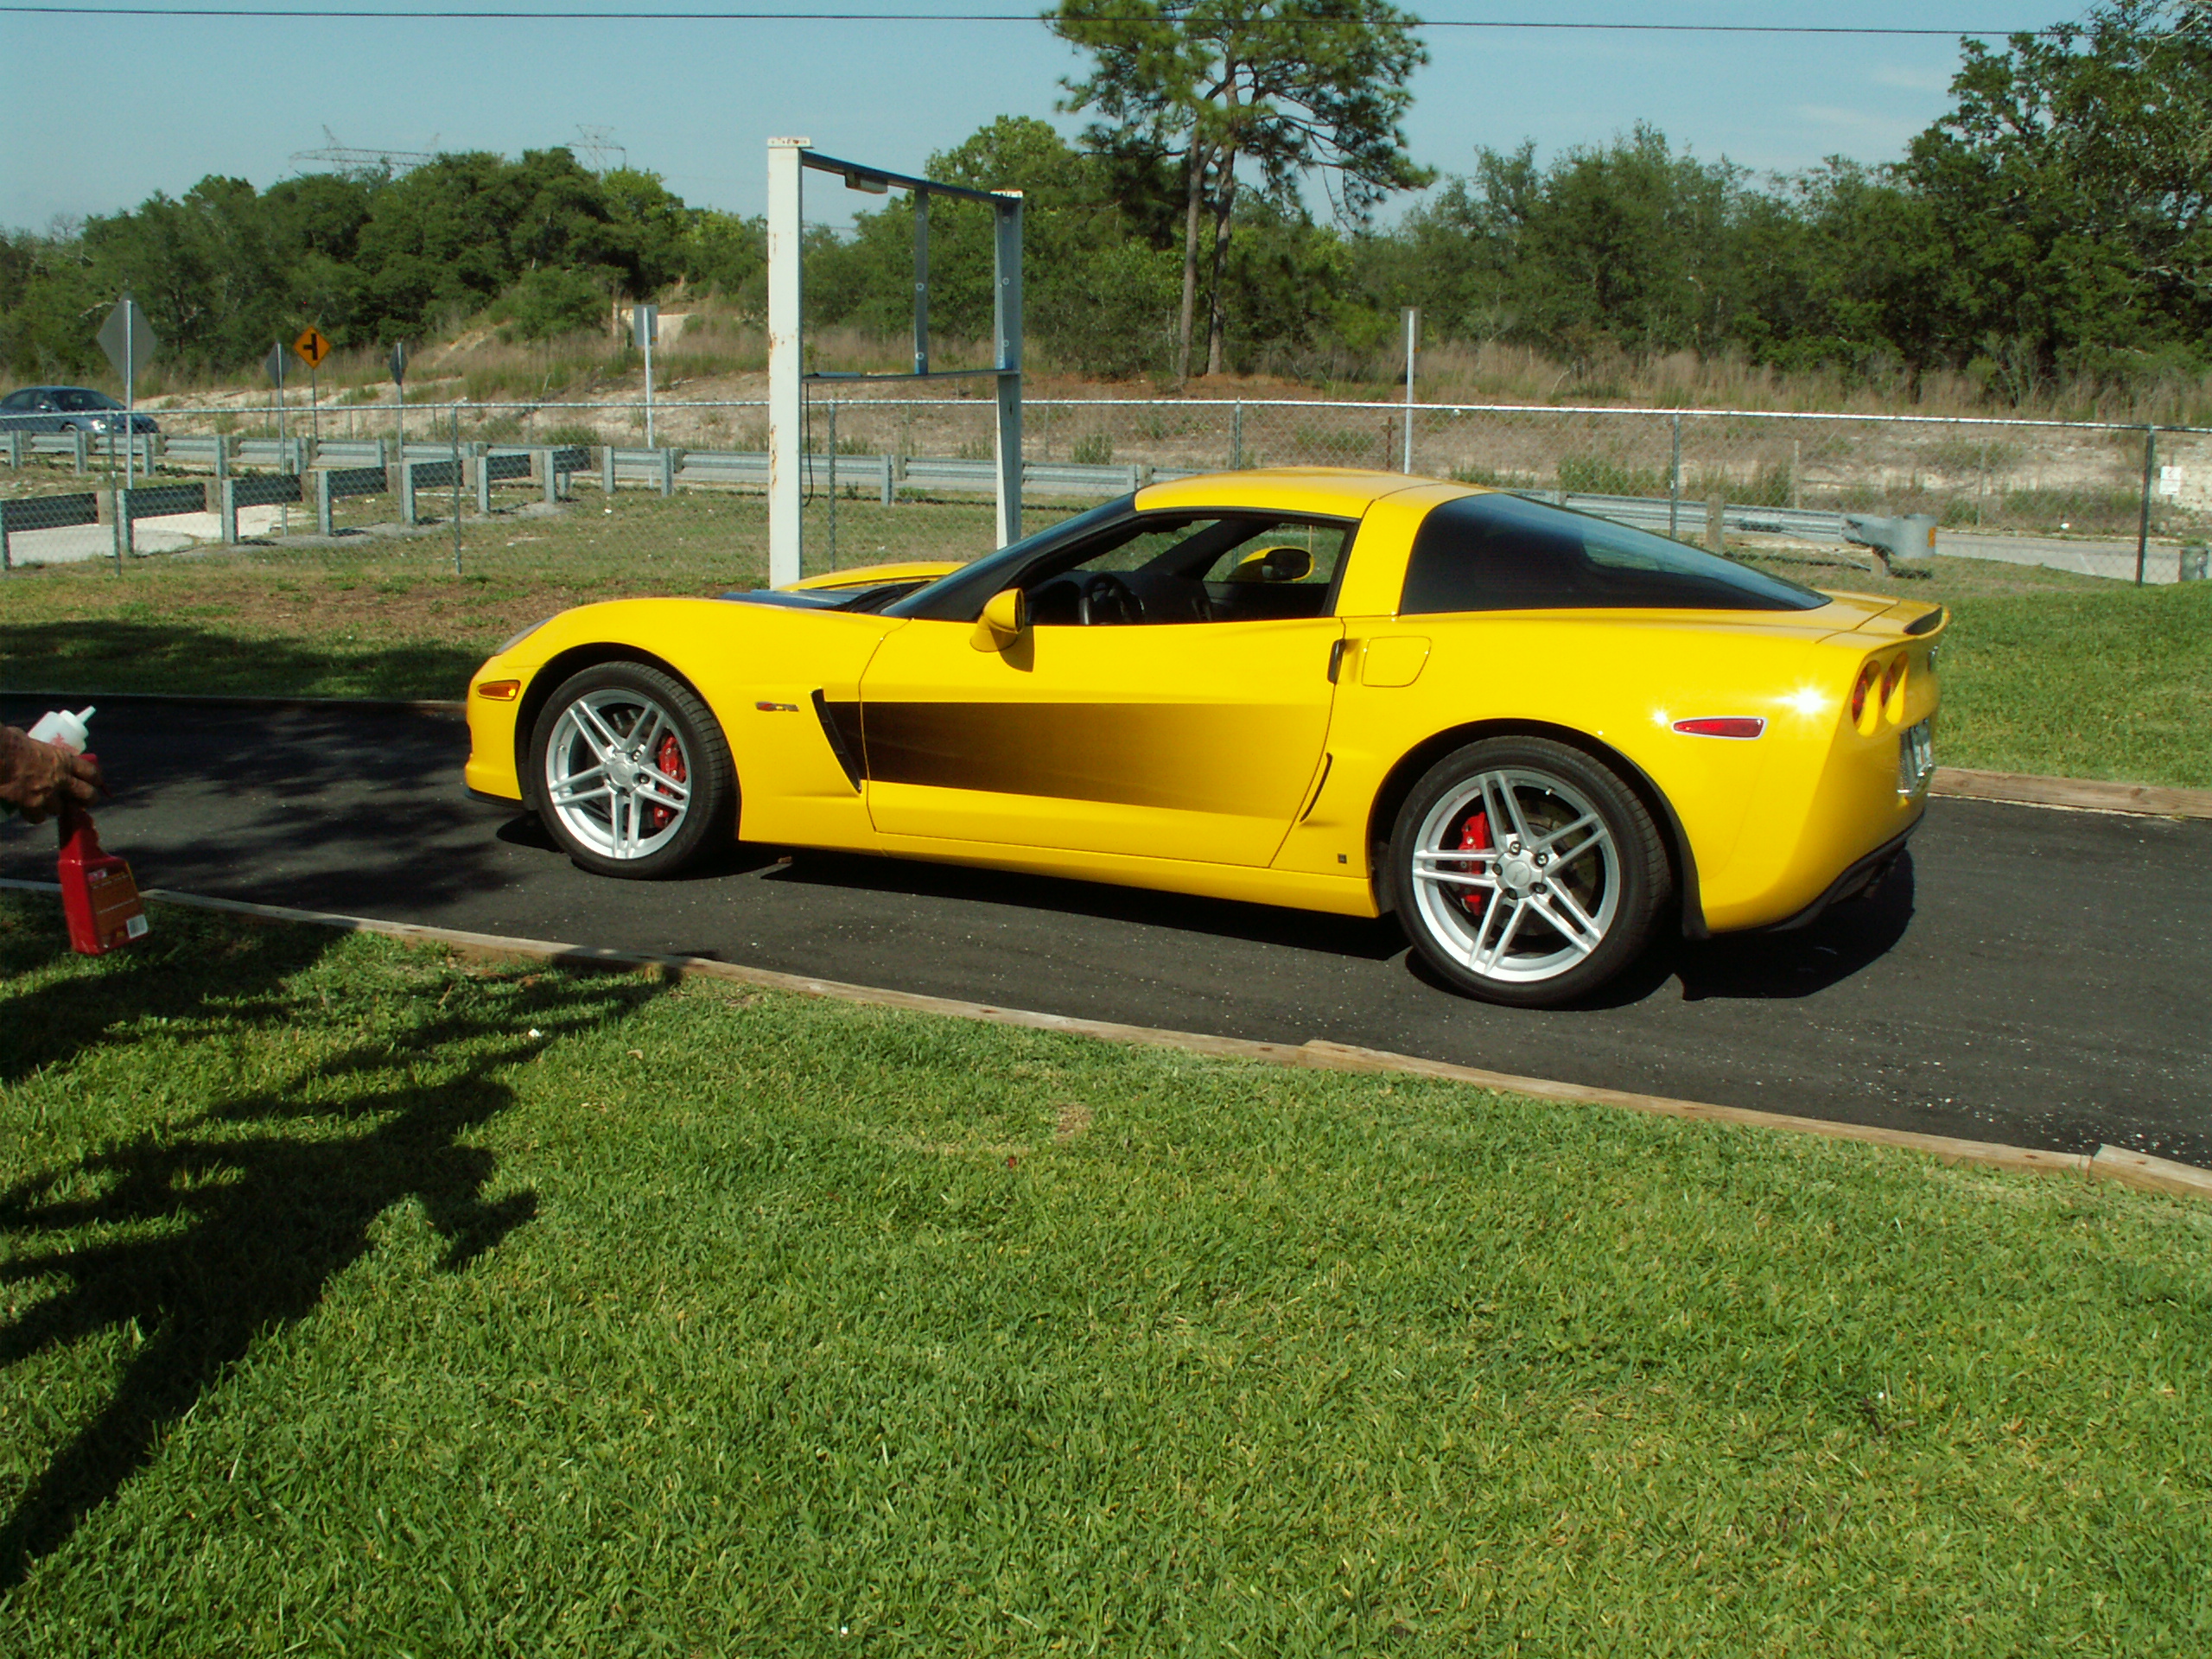 2005-2013 C6 Corvette, Side Graphic Sport Fade, Stainless Steel